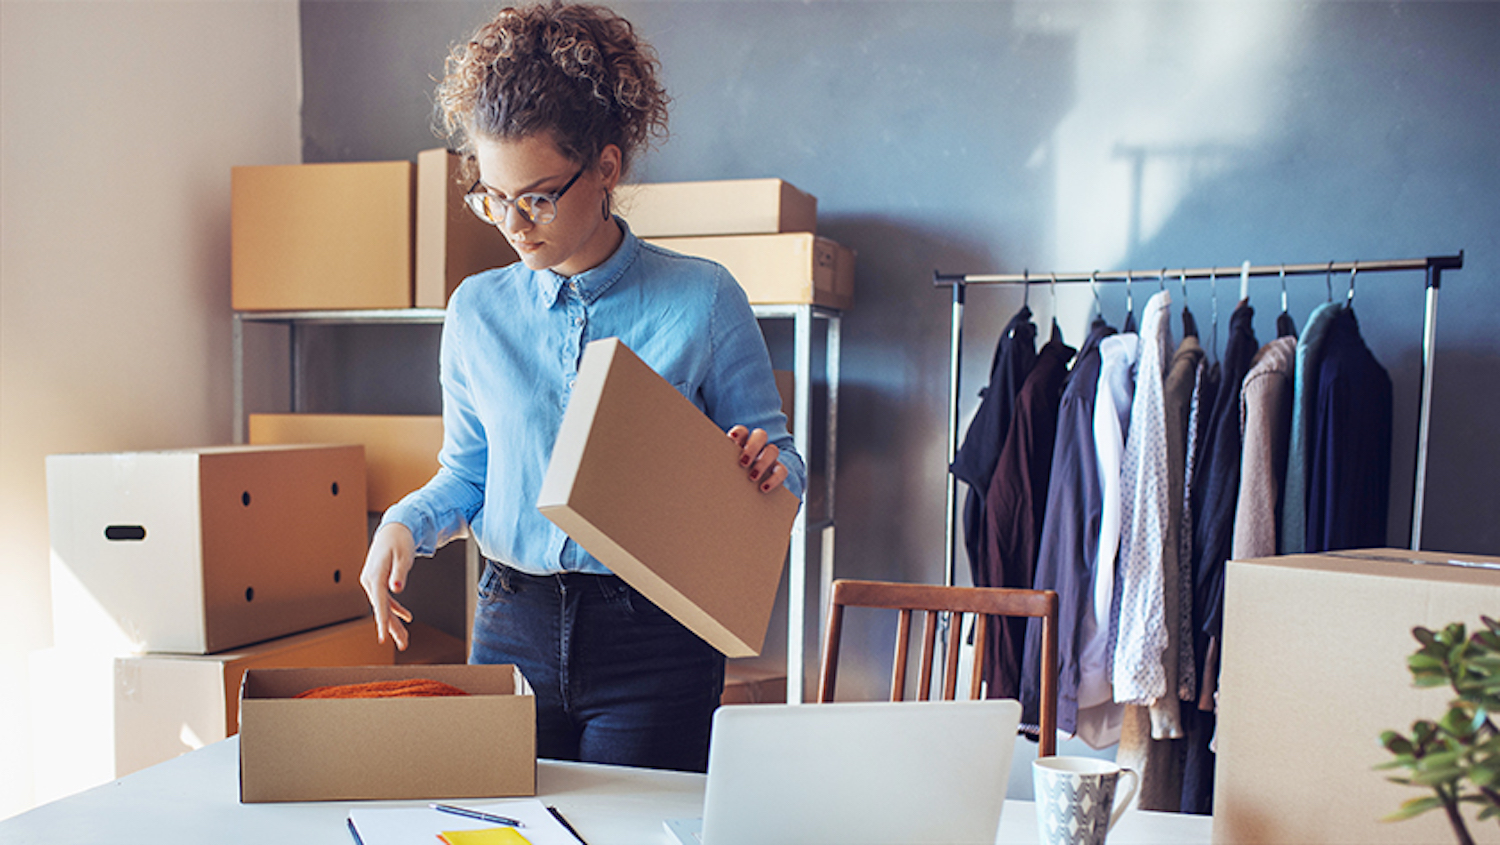 A fashion stylist prepares boxes of clothing to be shipped and considers what kind of business entity to form.. LLC status works well for most industries, except banking and insurance, which the state prohibits.